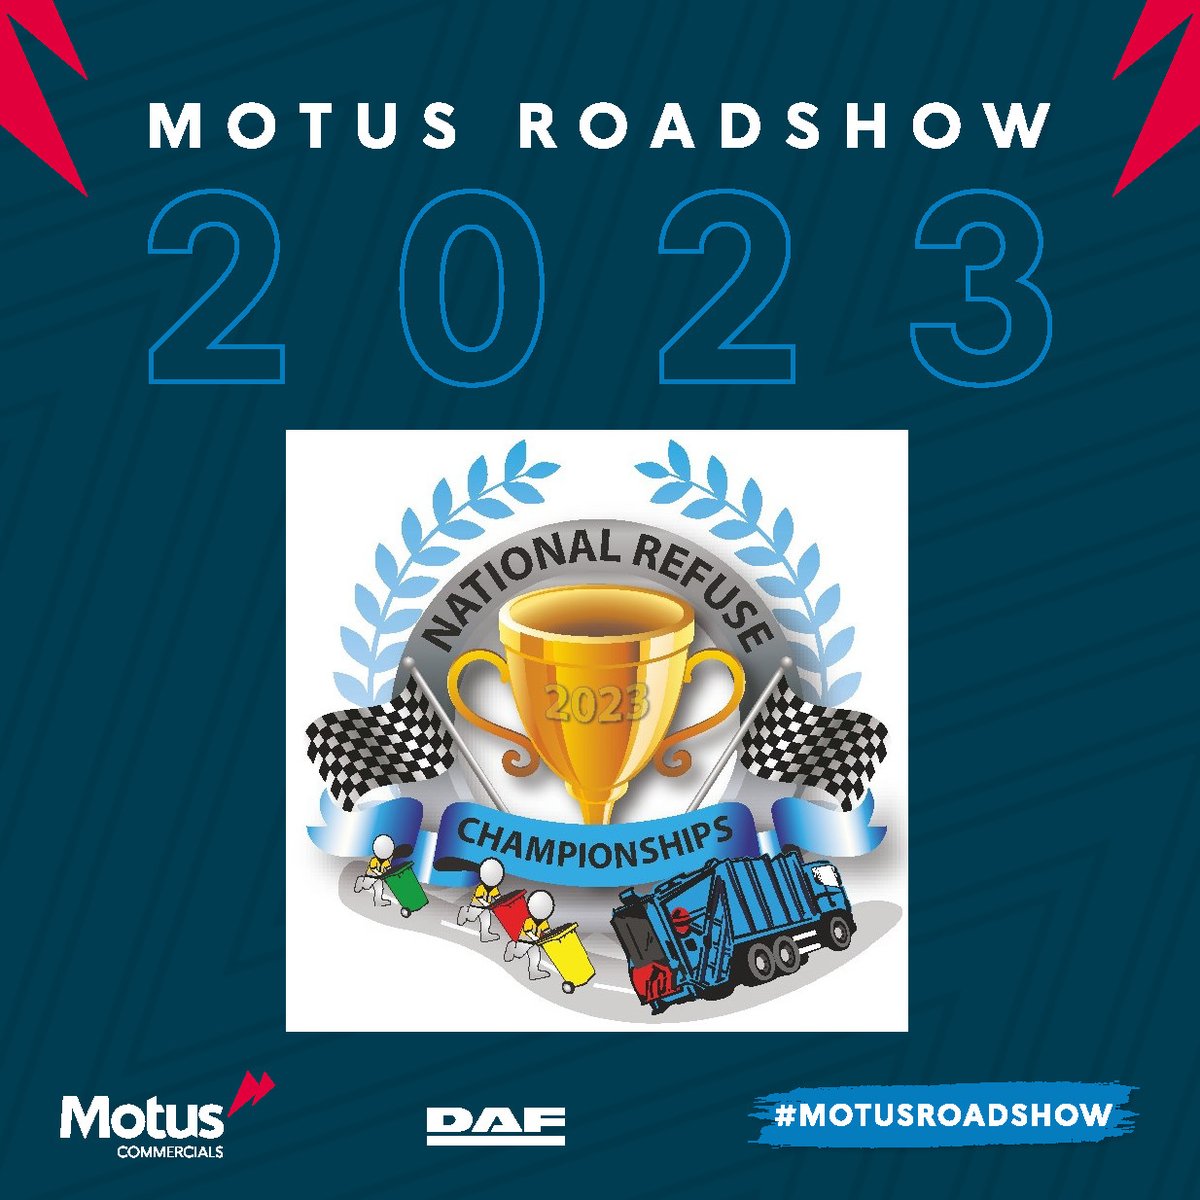 We're excited to announce that we are the headline sponsor for this year's National Refuse Championships!

This is happening this weekend, so don't miss it! 🤩

#HeadlineSponsor #Sponsor #NationalRefuse #Championship #TeamMotus #MotusCommercials